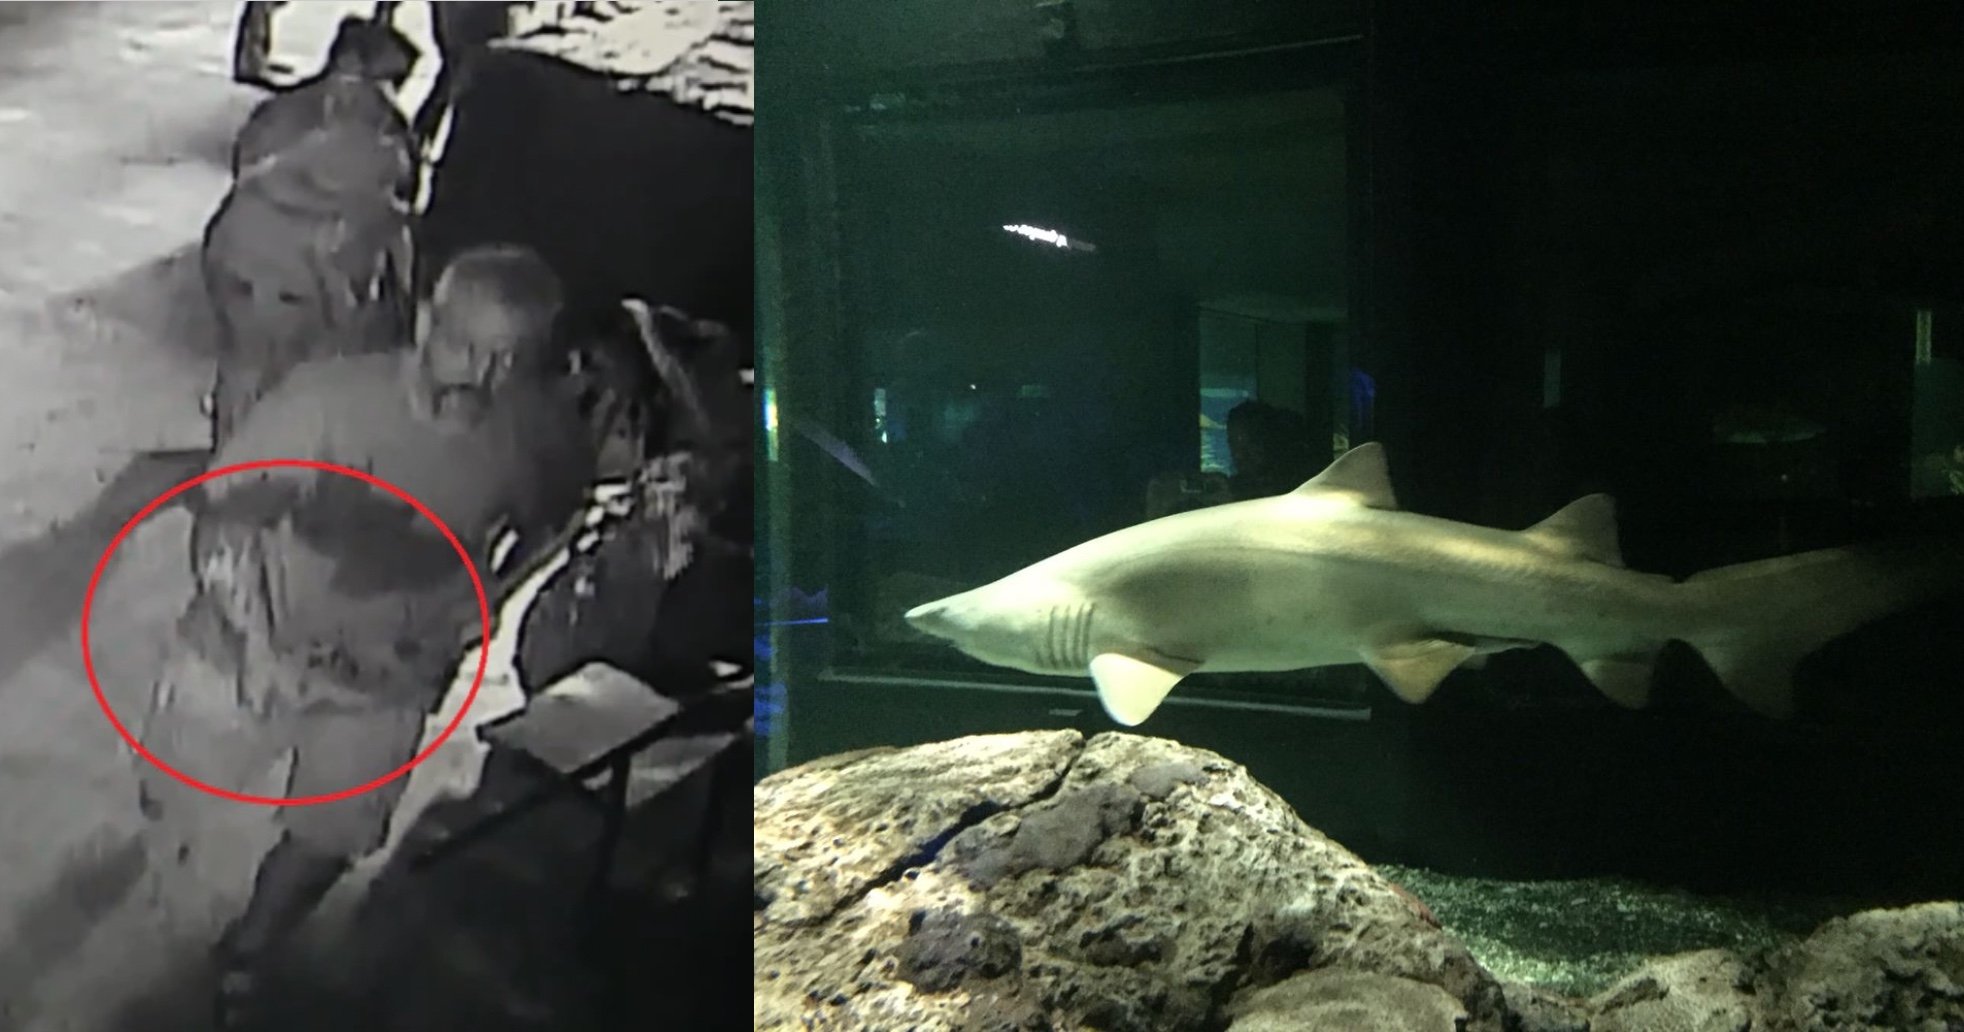 shark 1.jpg?resize=1200,630 - Utterly ‘Insane’ Robbery In San Antonio Aquarium - Disguises A Shark Into A Baby And Hid It In The Stroller